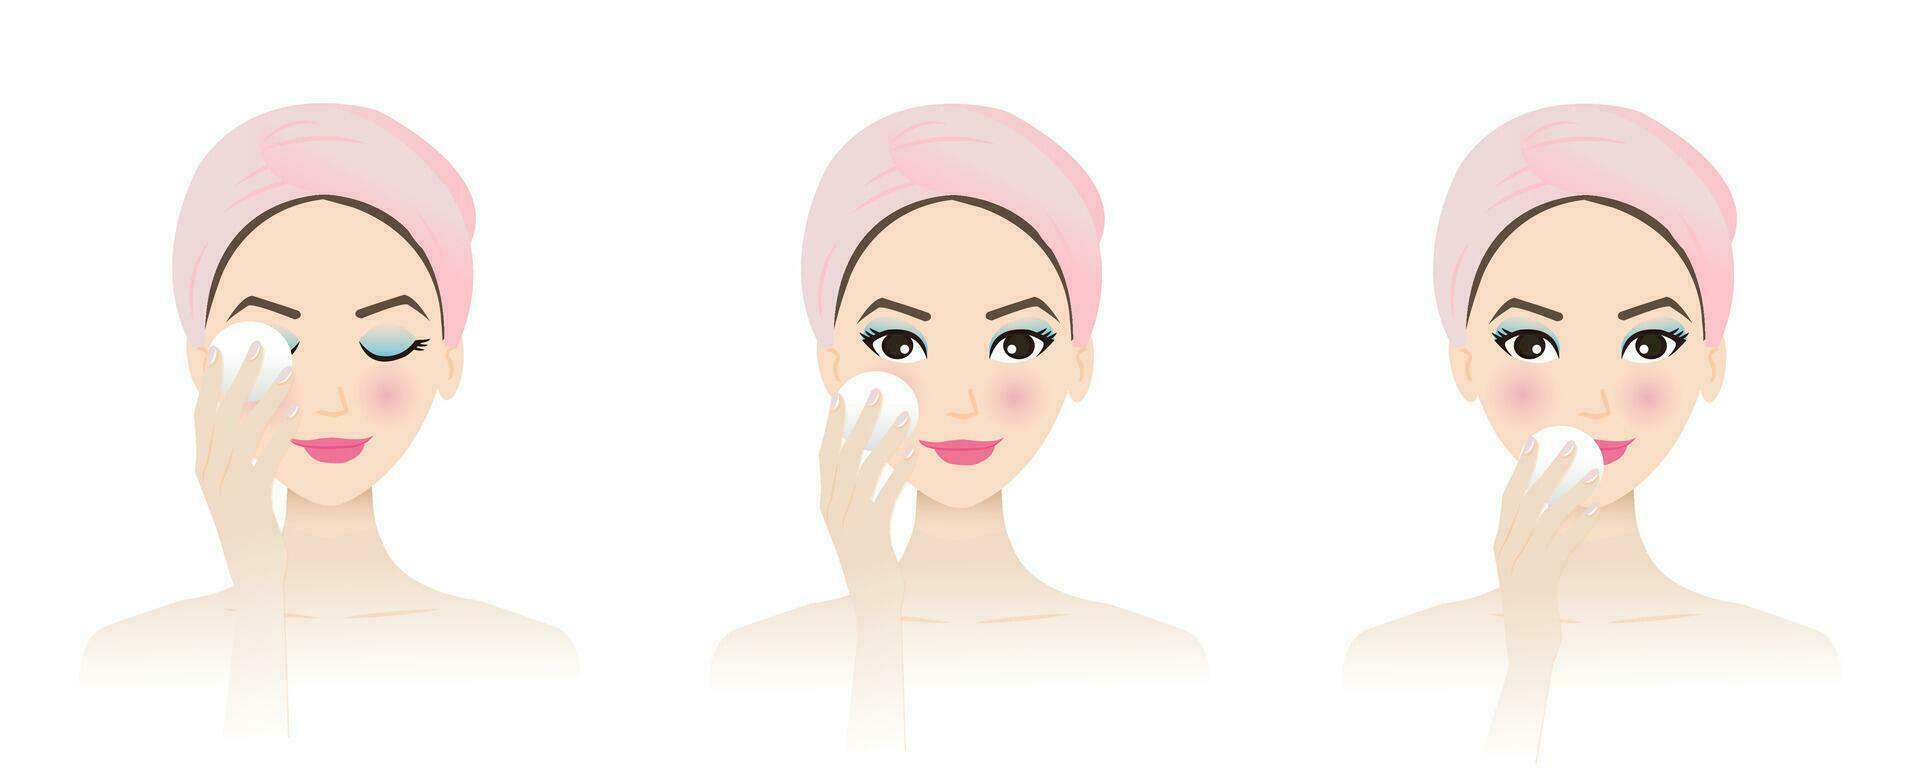 Set of makeup remover from cute woman face vector illustration isolated on white background. Step of makeup removal, mascara, eye liner, foundation, blush, lipstick and lip color with cotton pad.